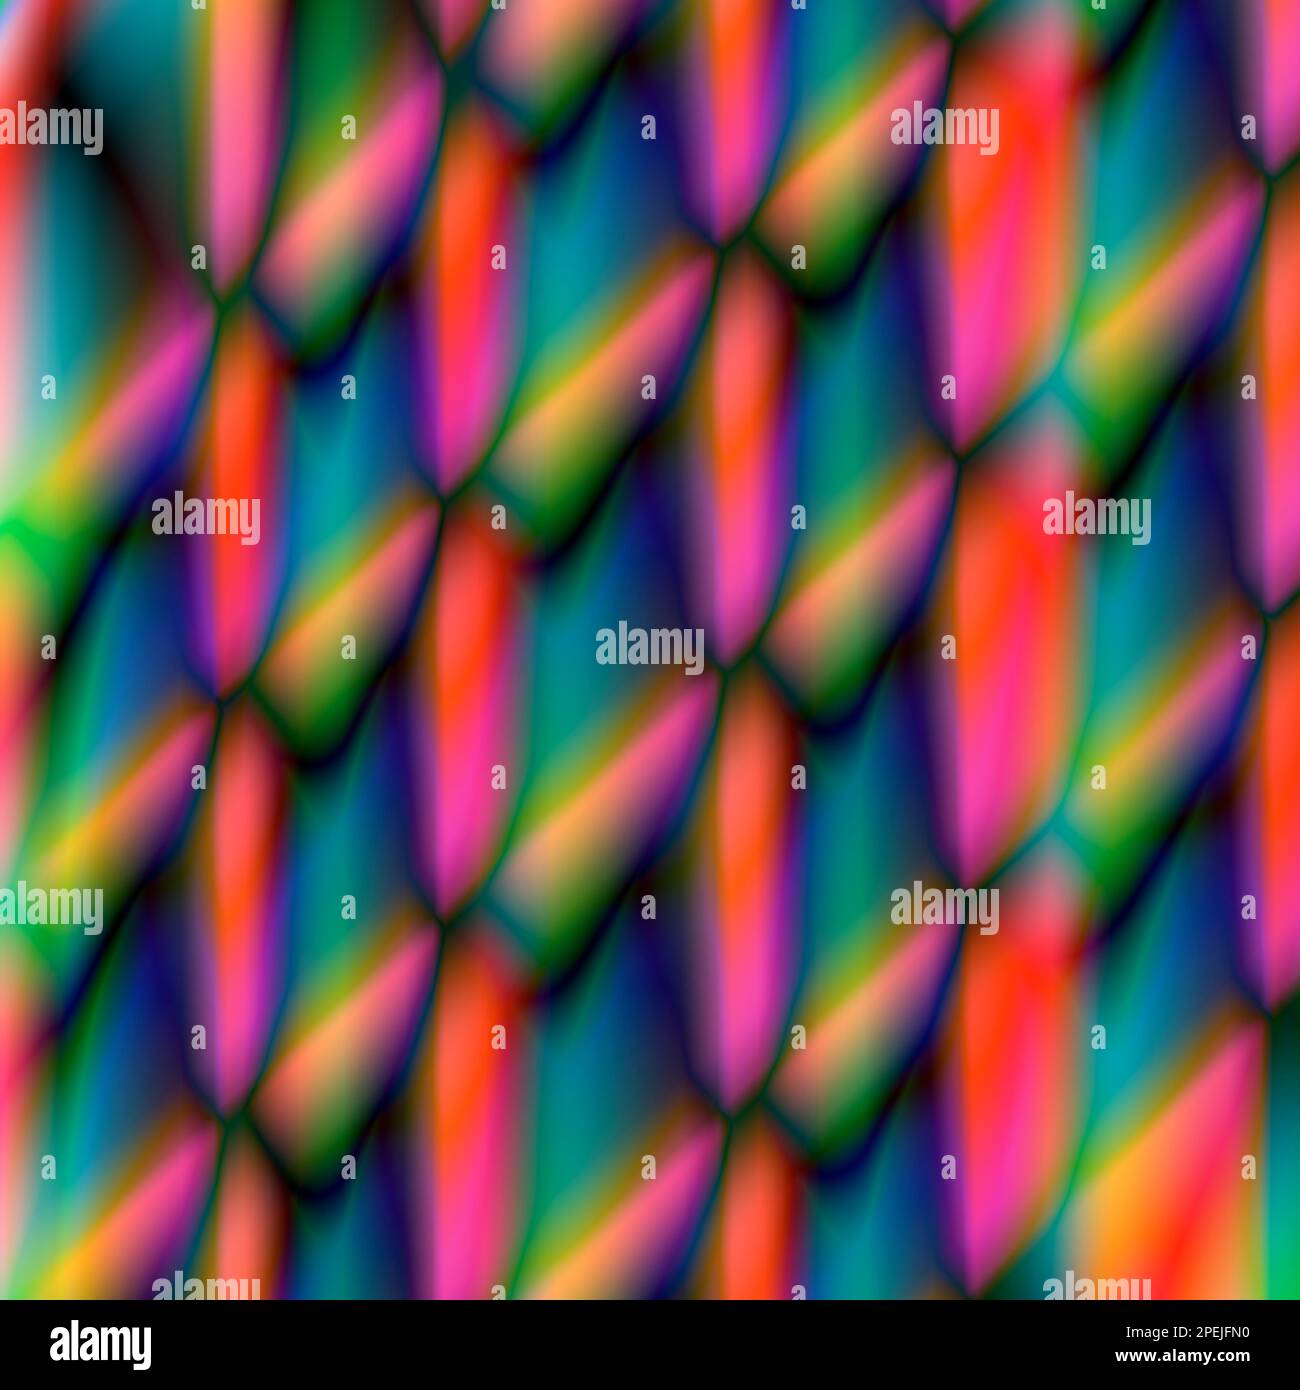 Colourful abstract pattern and background Stock Photo